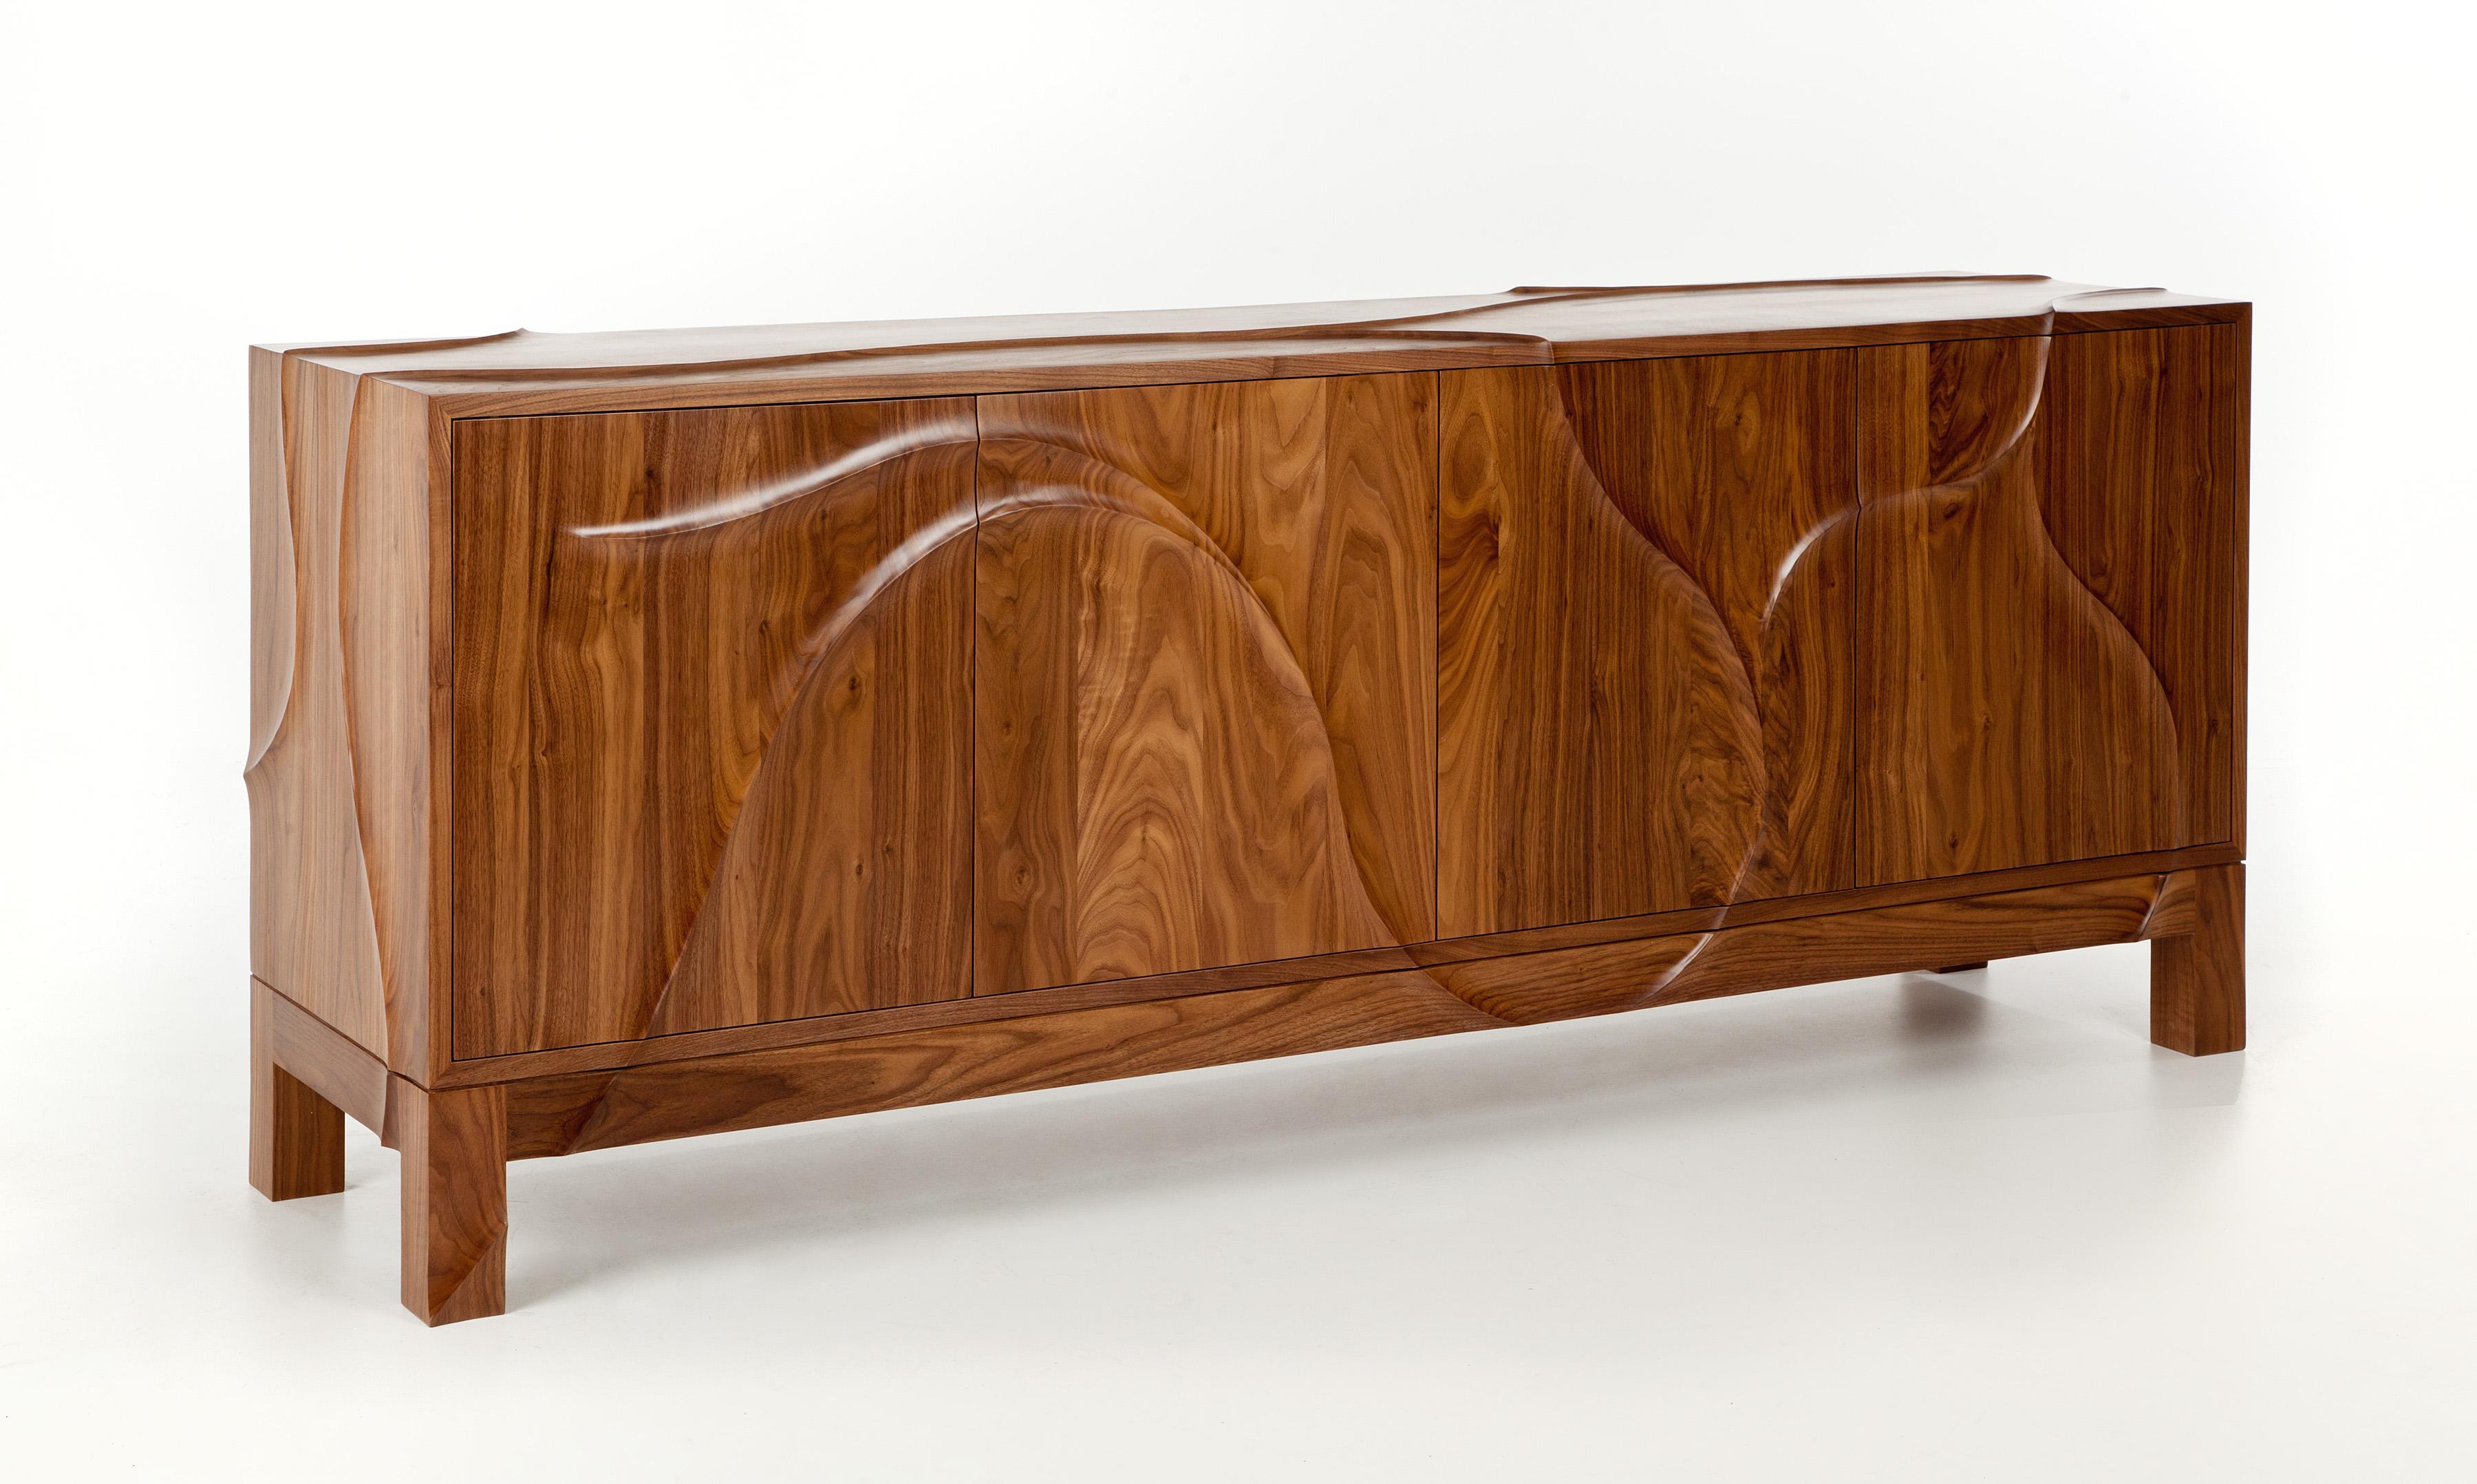 Esker Walnut Credenza with hand-carved detailing made to order.

With a distinctive aesthetic that fuses a linear silhouette with an organic flowing pattern and a stunning grain in the finest walnut, this bespoke piece expertly crafted by Dunleavy